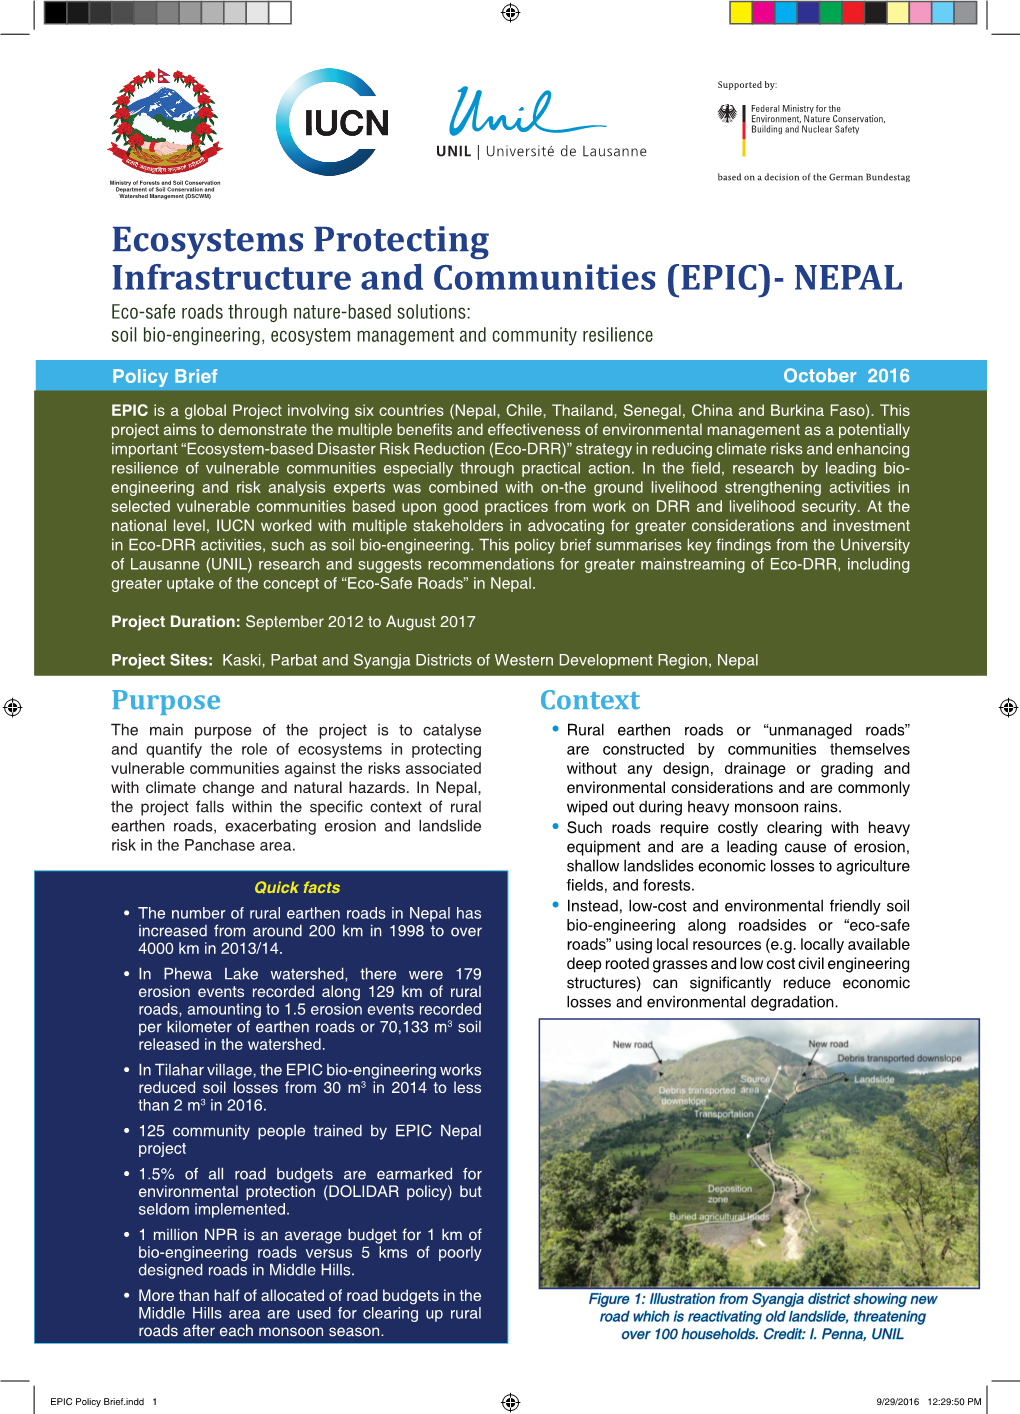 Ecosystems Protecting Infrastructure and Communities (EPIC)- NEPAL